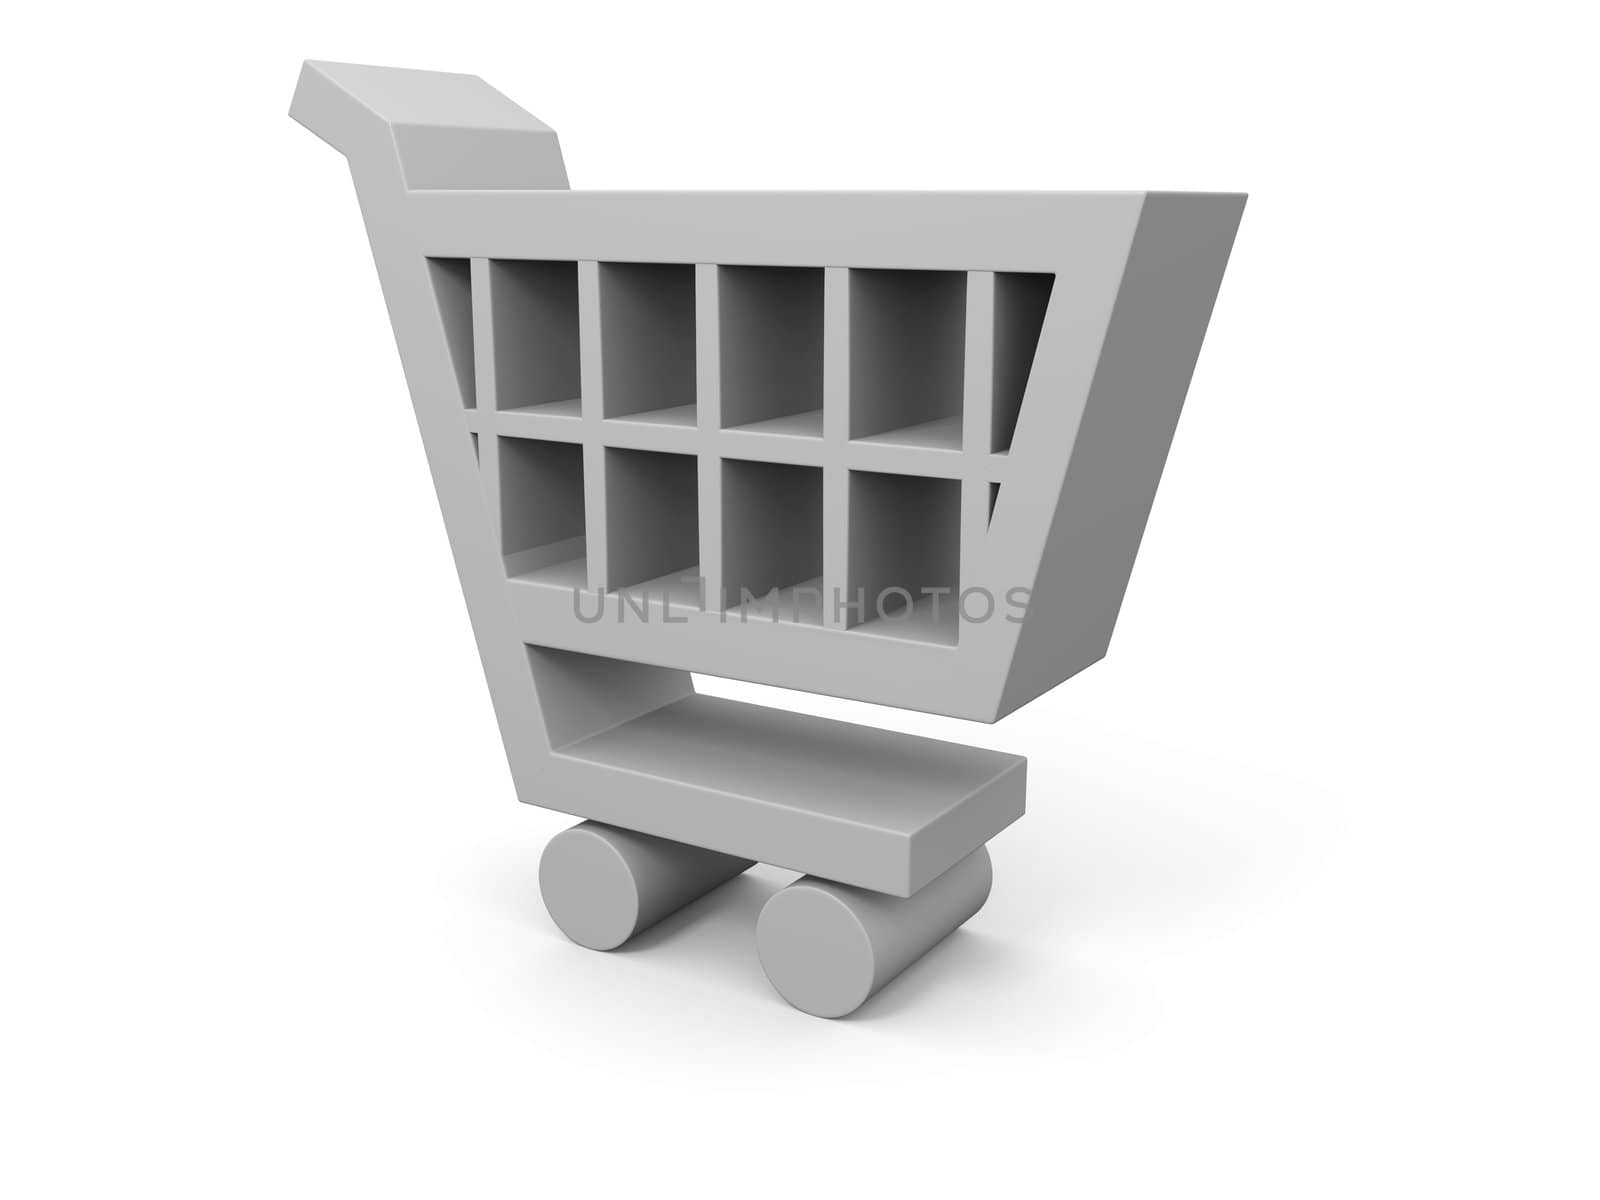 3D illustration of shopping trolley symbol on white background